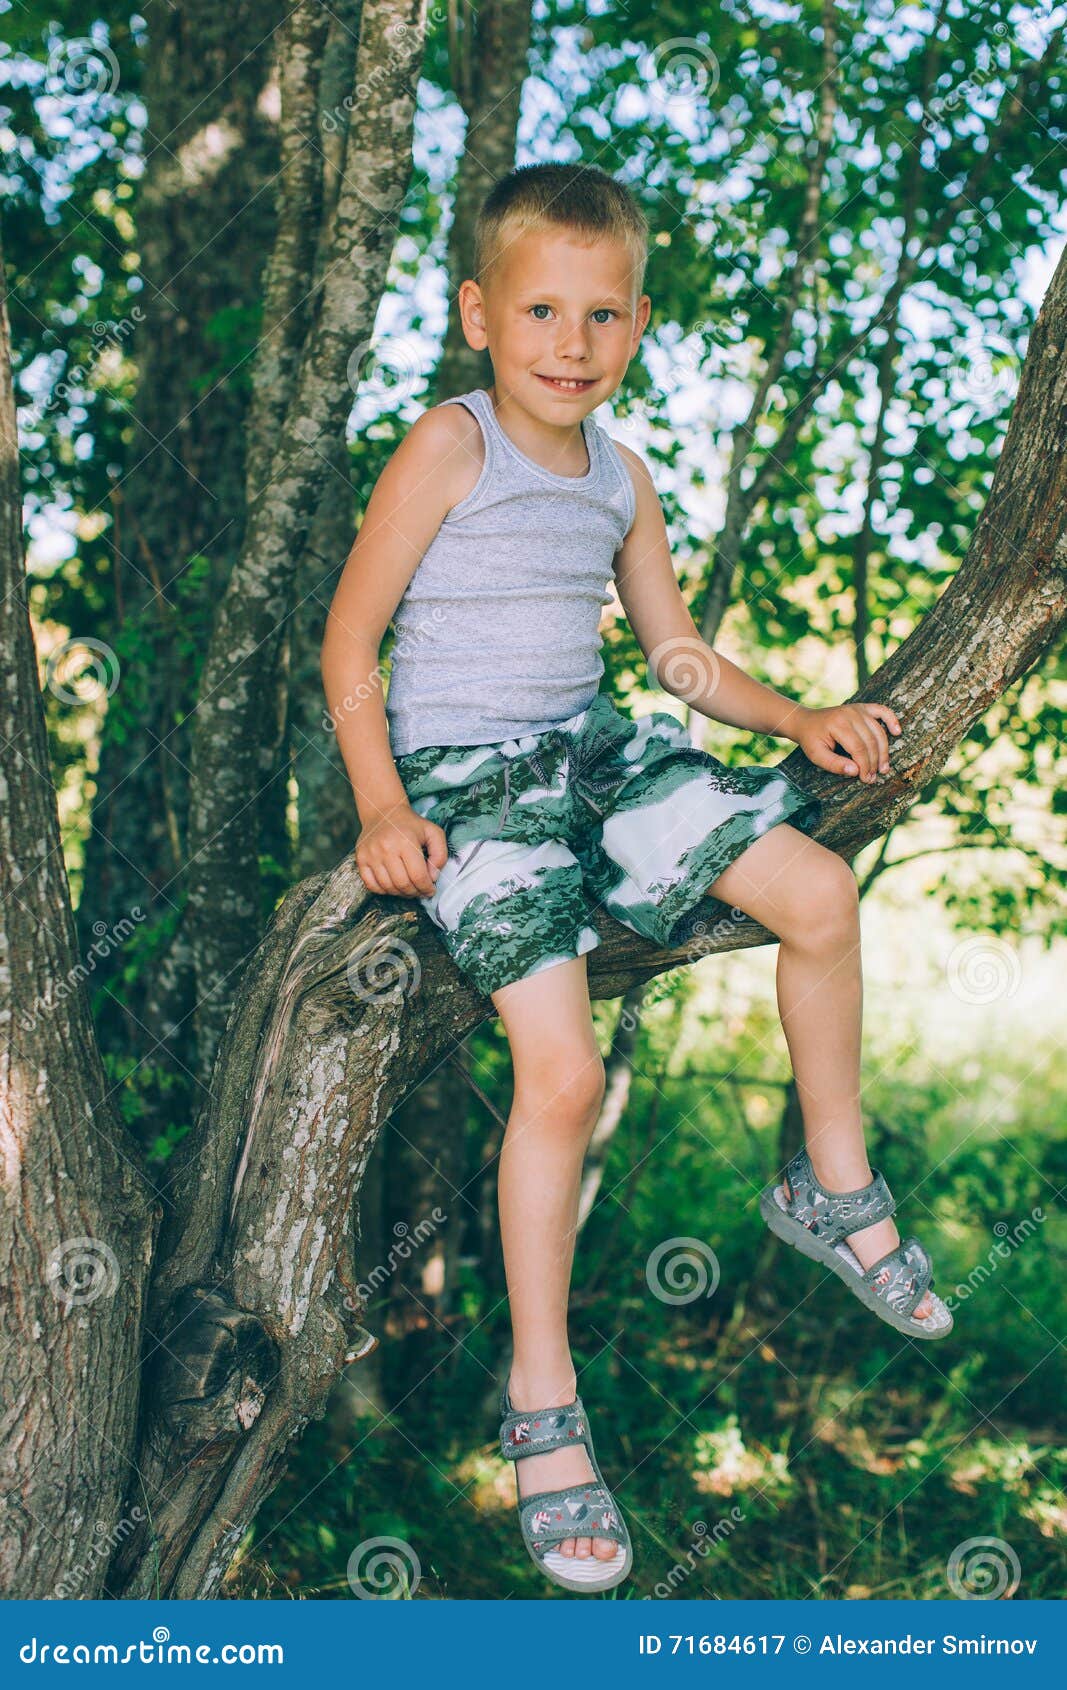 Little Boy in Shorts Sitting Up a Tree Stock Image - Image of forest ...